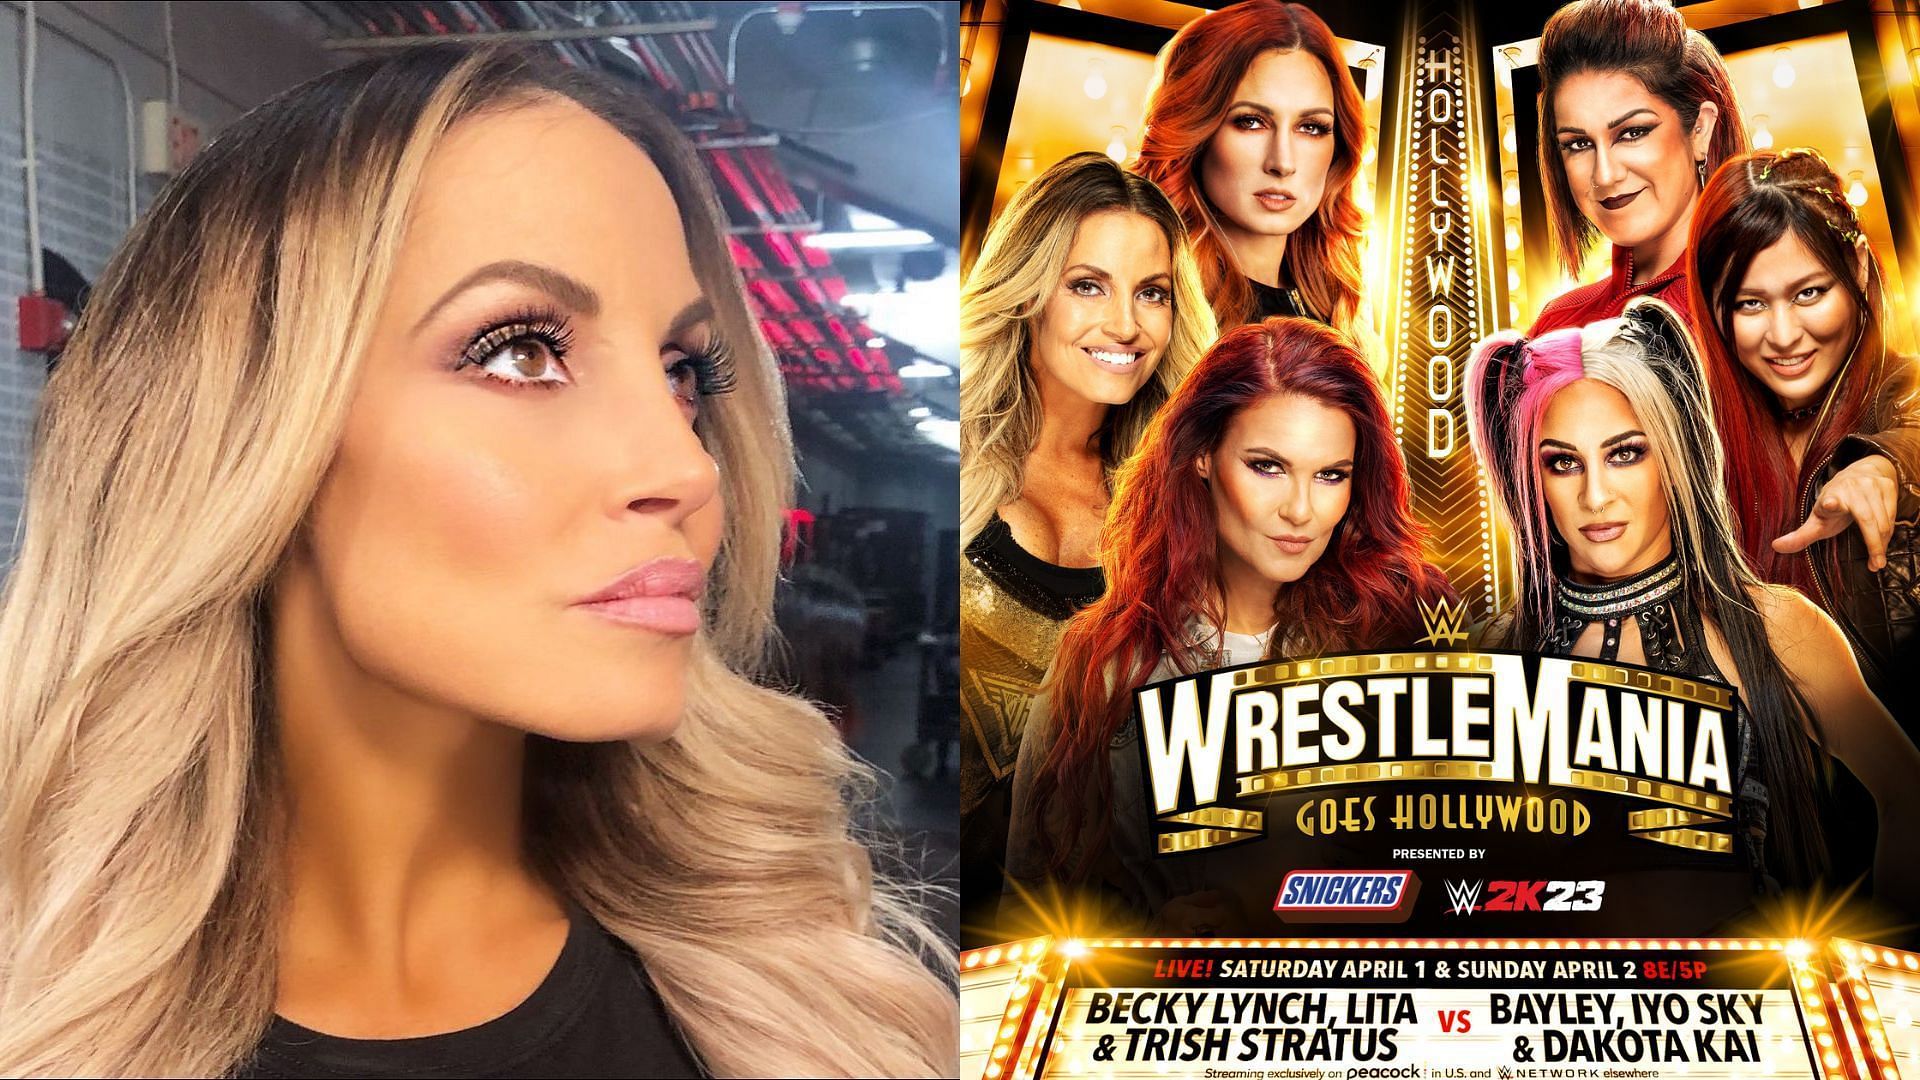 Trish Stratus will return to the ring after nearly four years